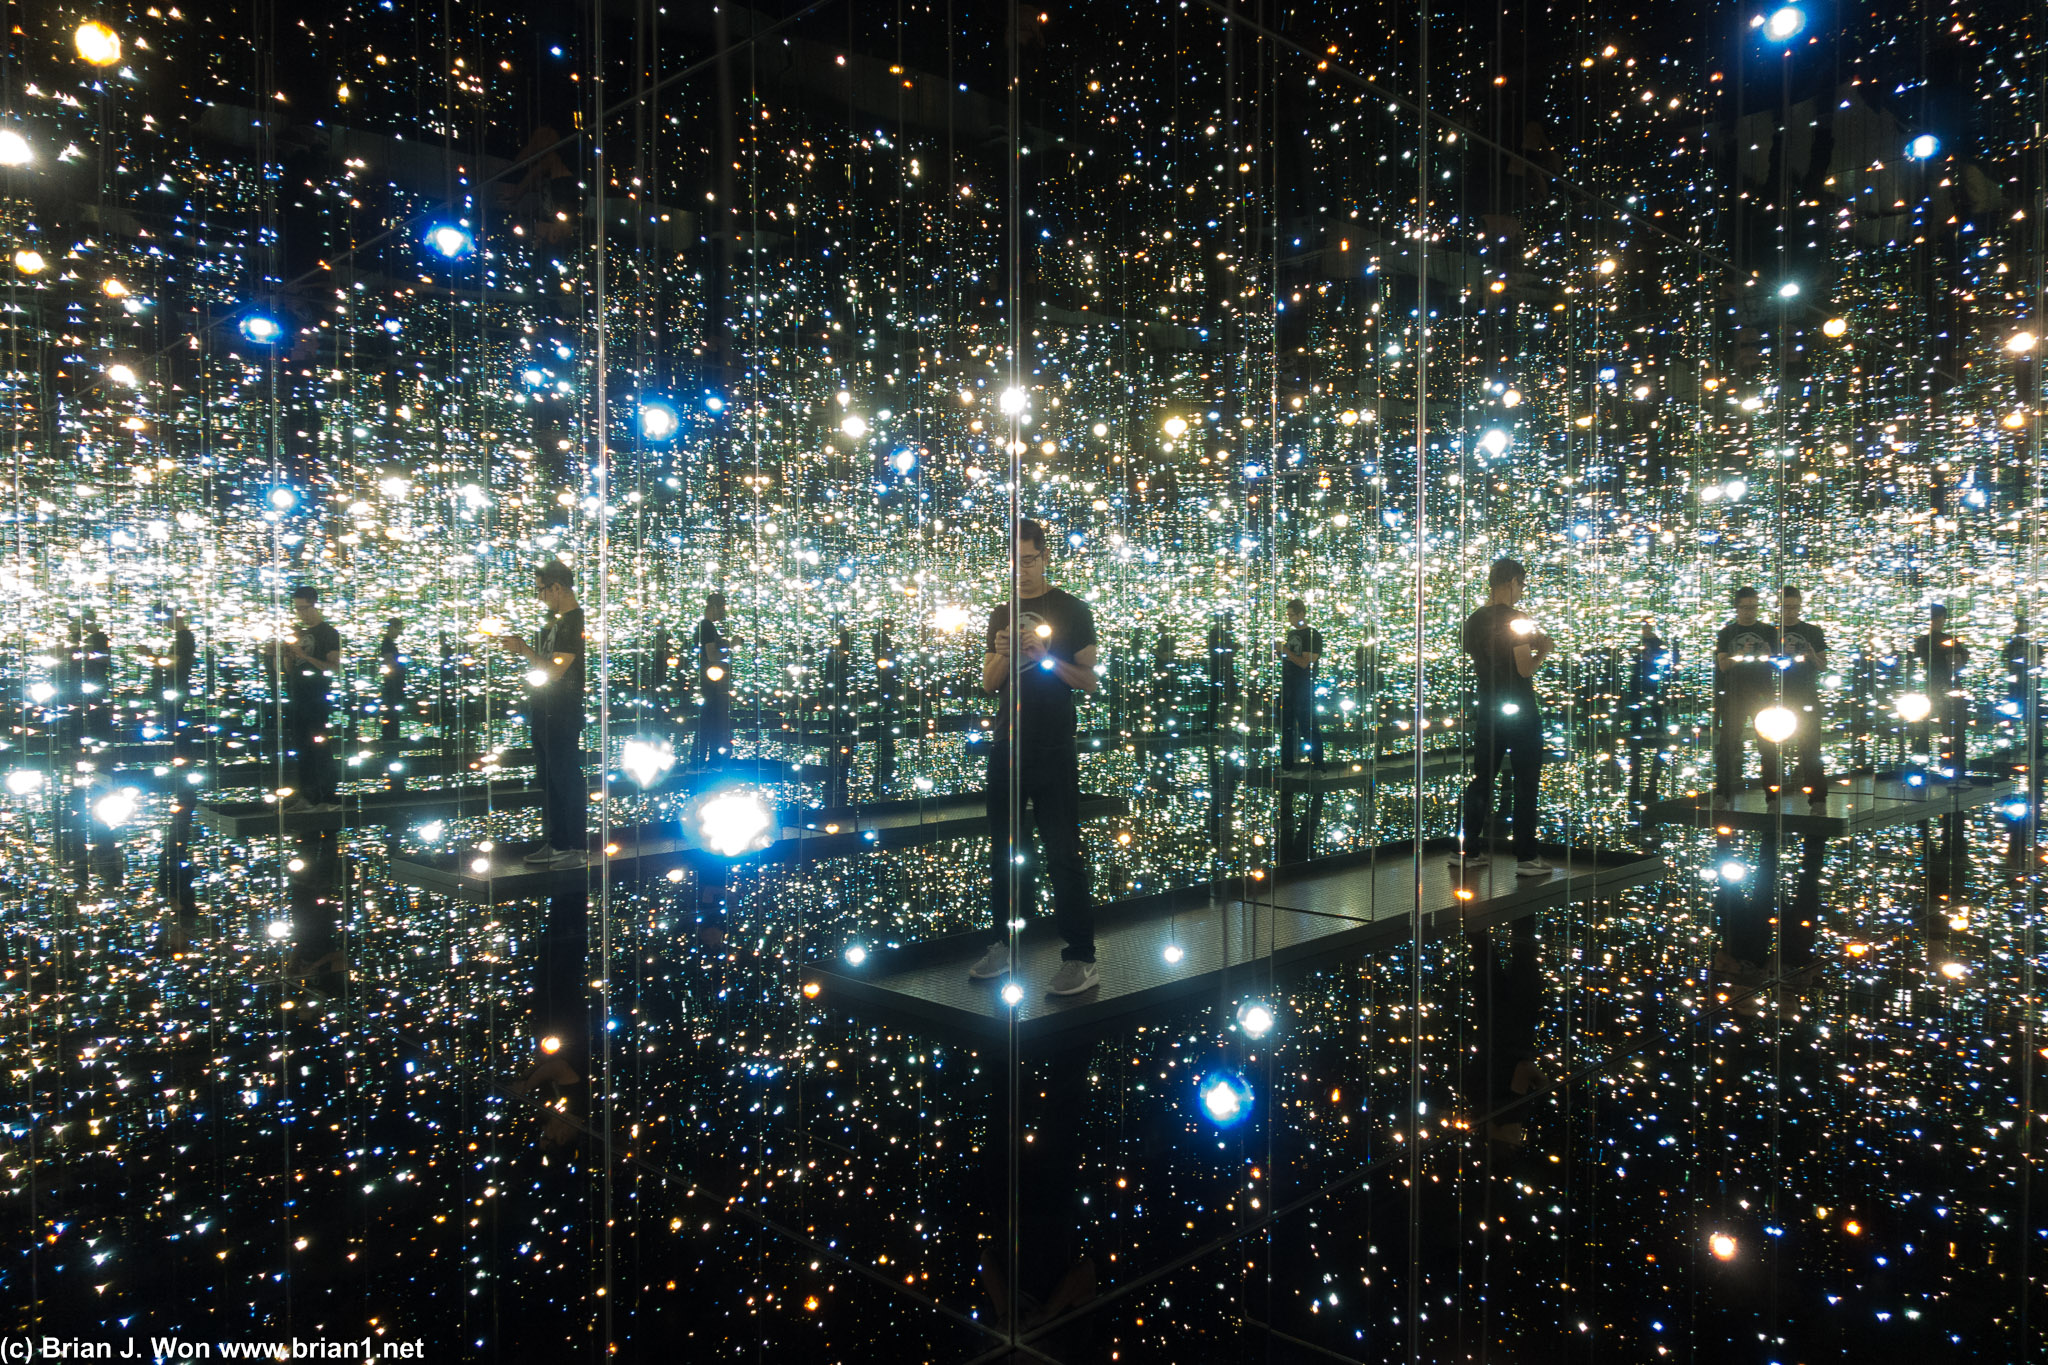 Infinity Mirrored Room - The Souls of Millions of Light Years Away.